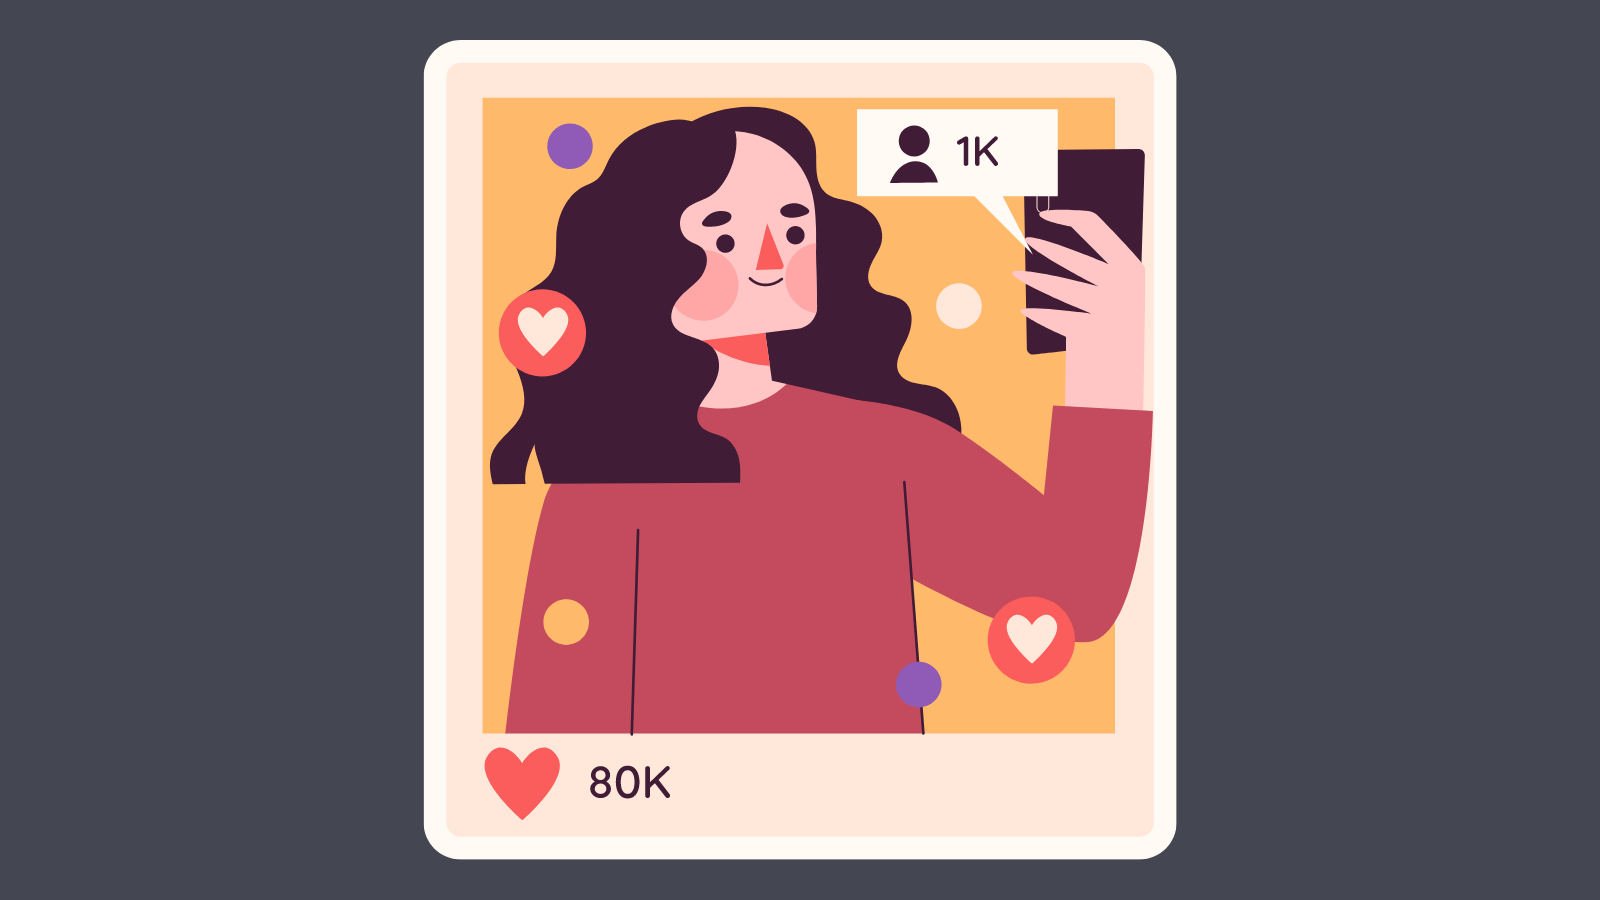 A young woman taking a selfie surrounded by heart icons